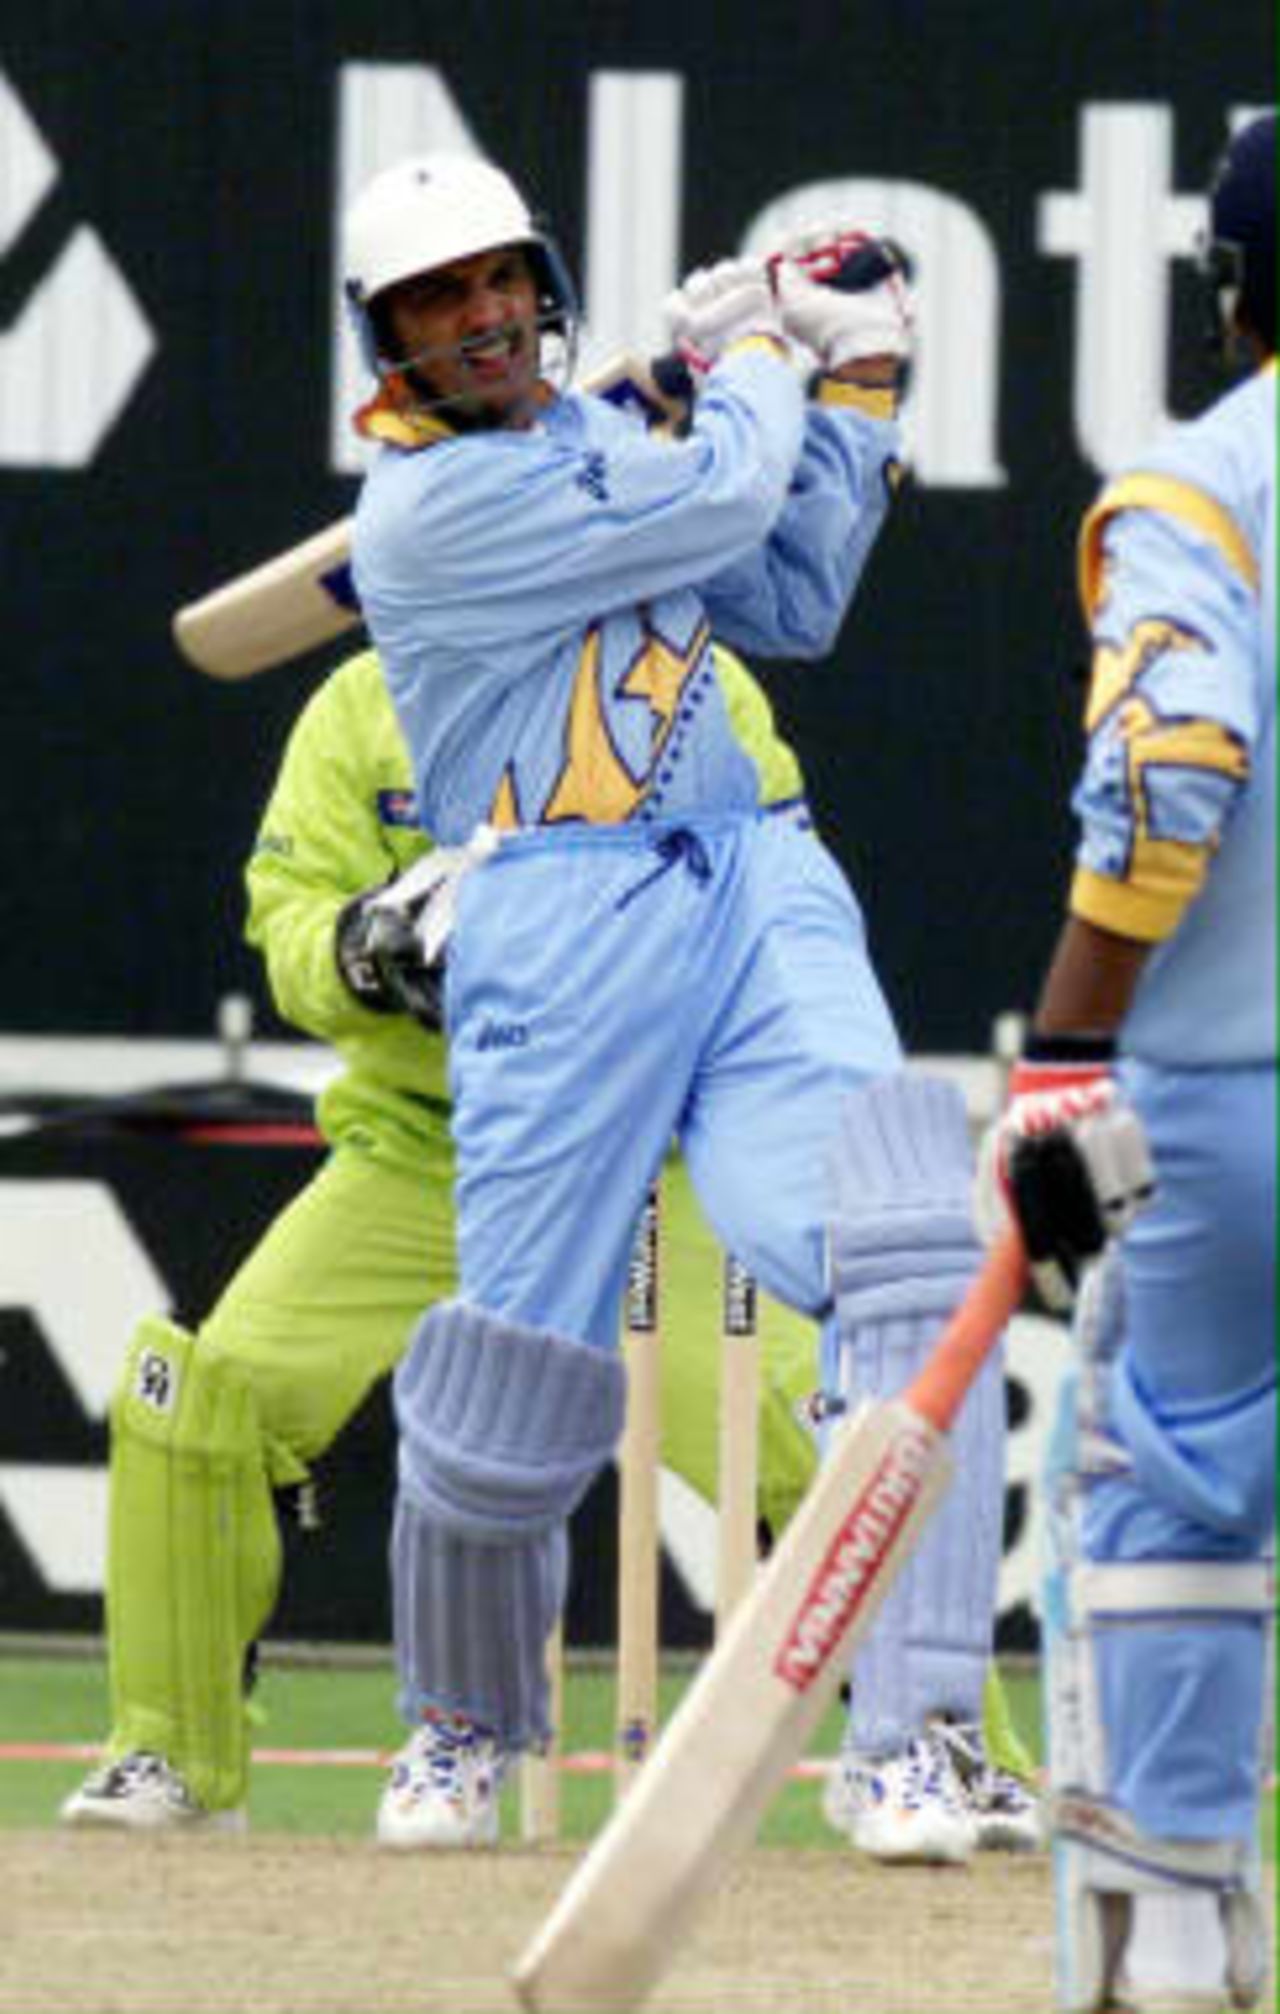 Mohammed Azharuddin hits a six during his highest scoring innings of WC99 during the match at Old Trafford 08 June 1999 against Pakistan